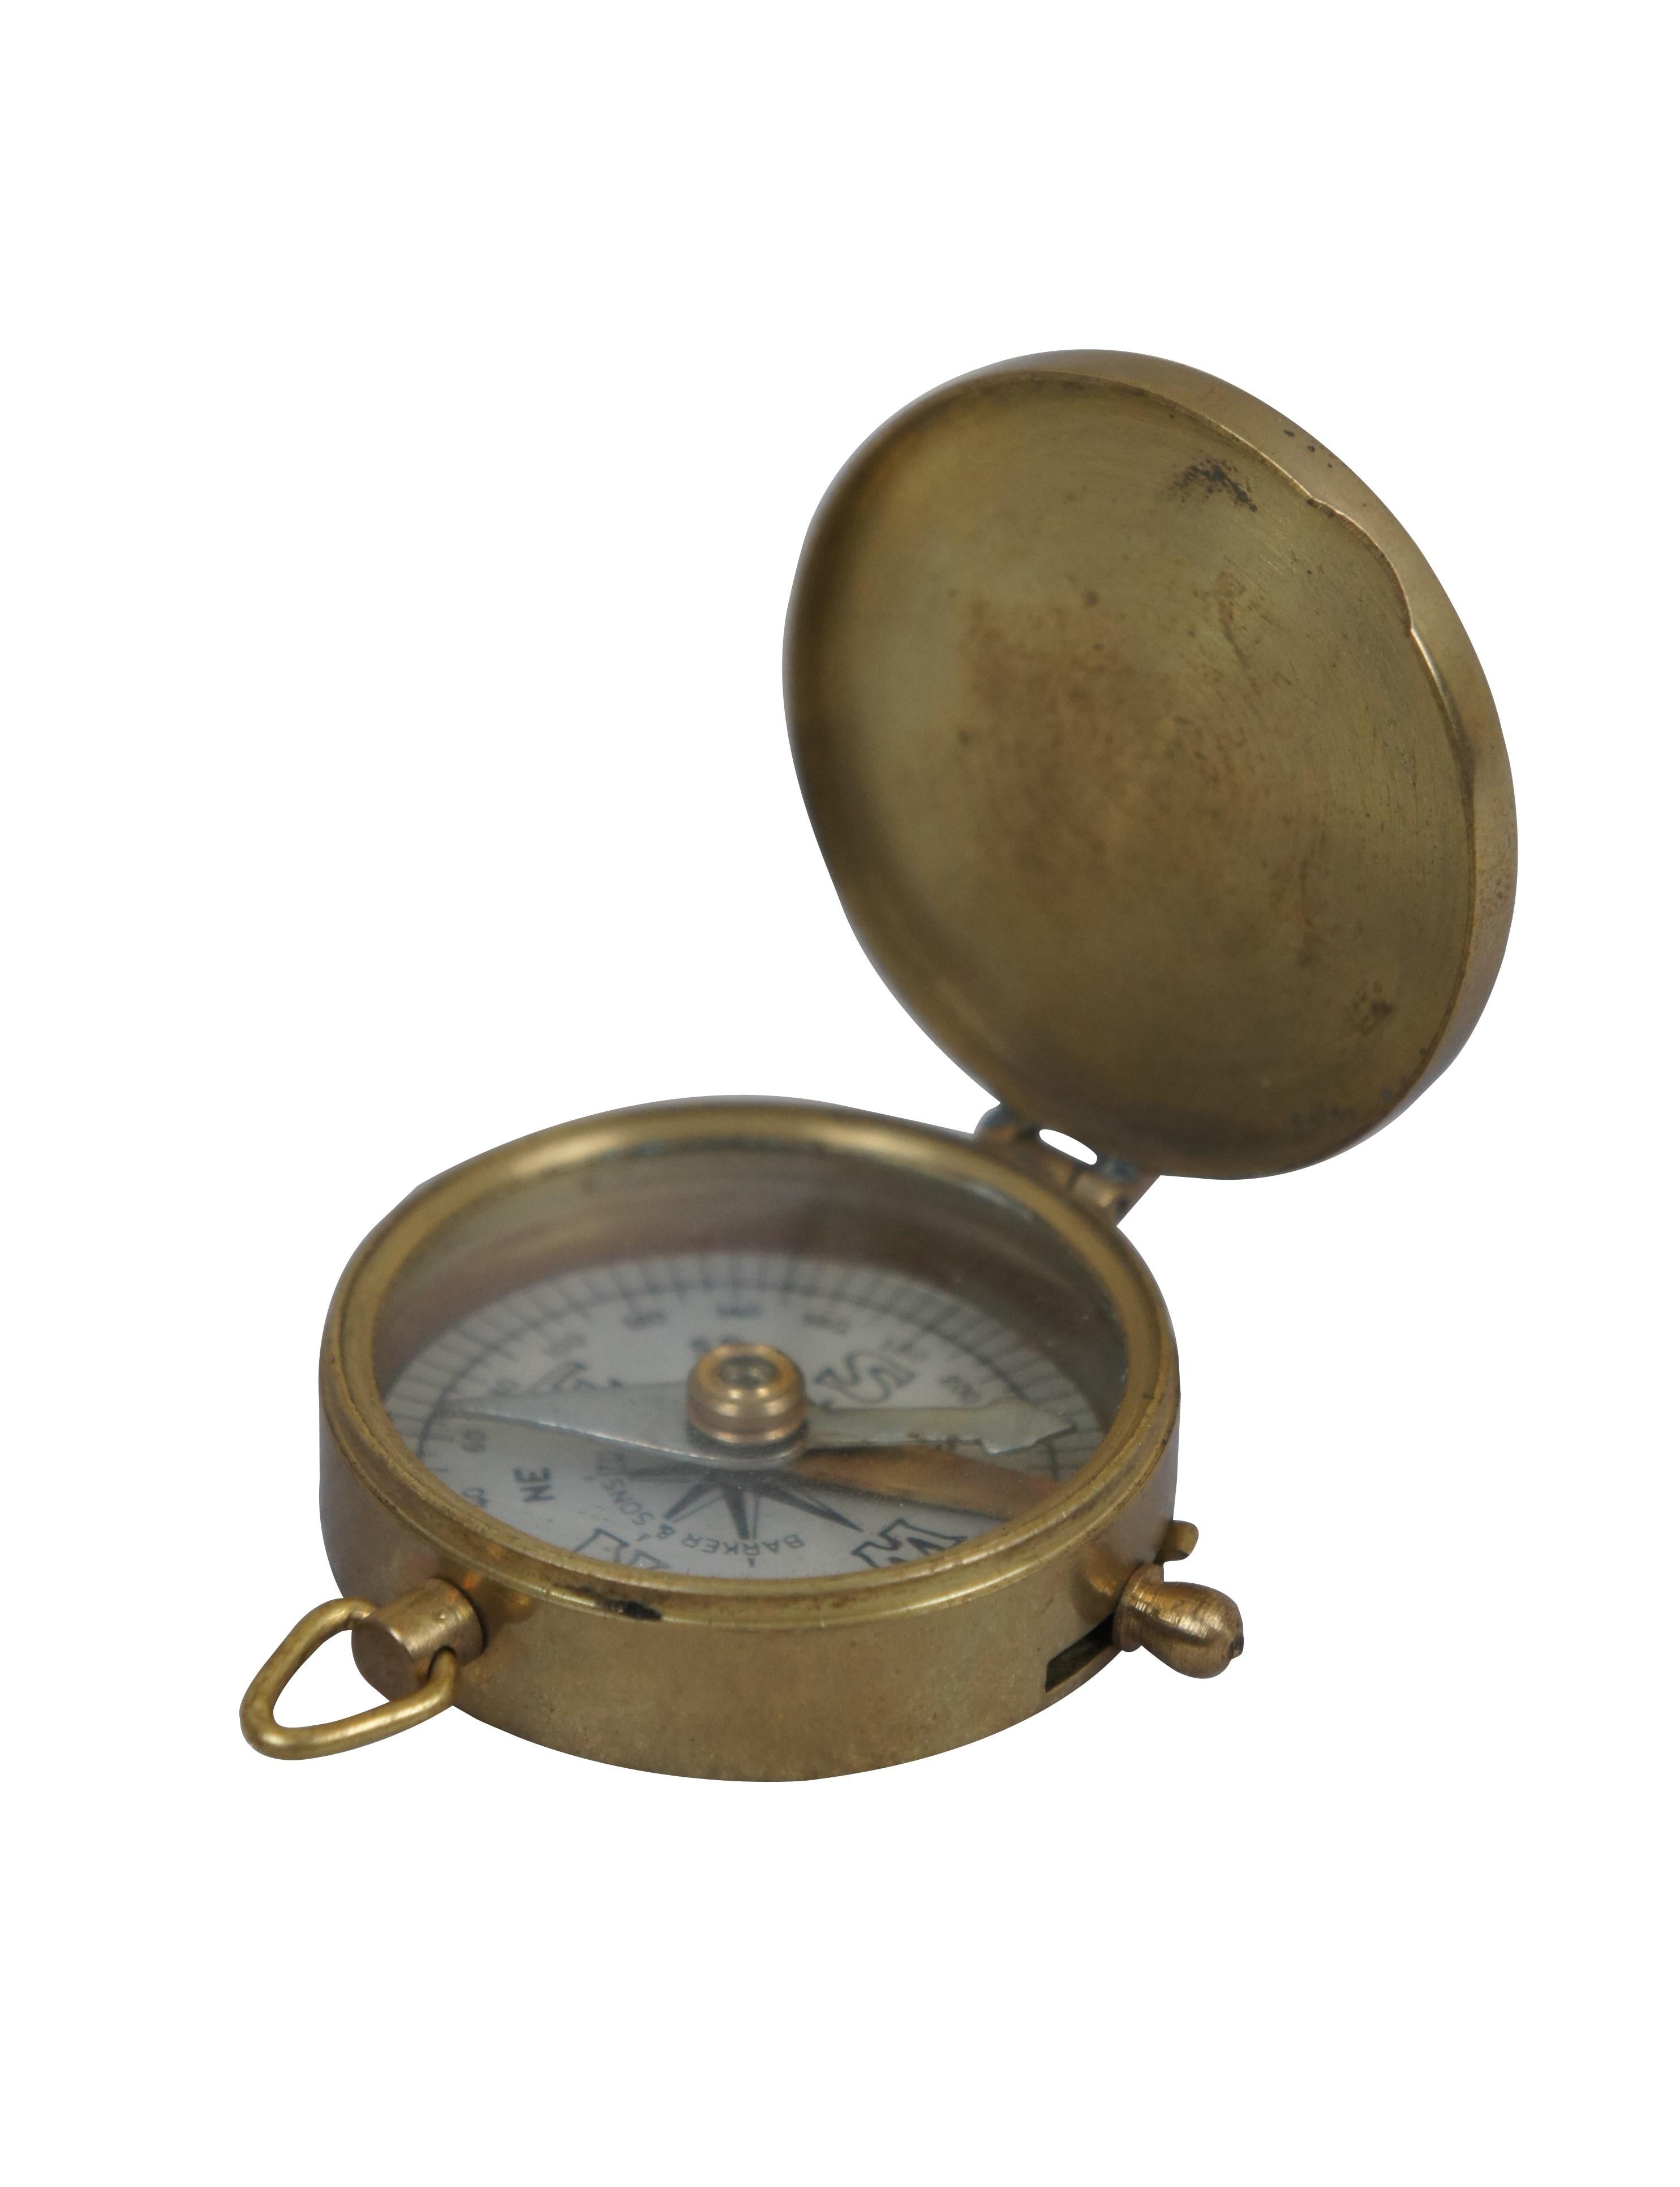 Early to mid 20th century compass by F. Barker & Sons Ltd of London. Brass case with white face and ring for suspending from a watch fob / chain.

